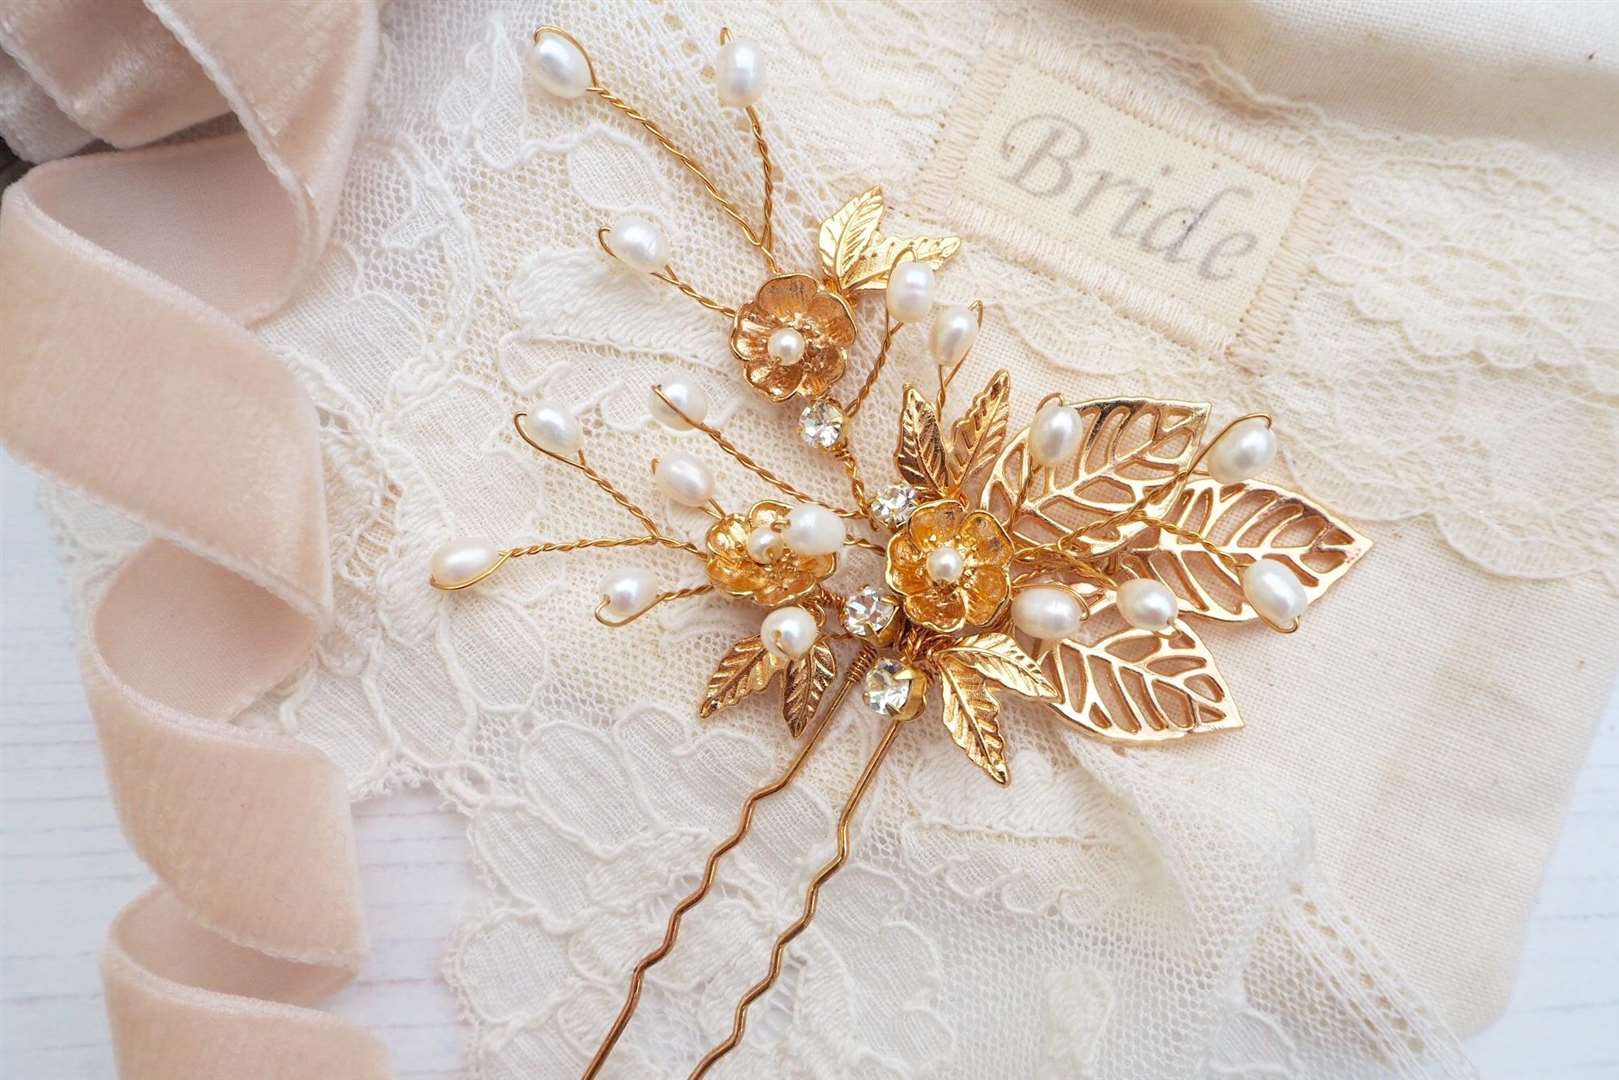 Lucy Fisher of the Vintage Bobbin Bridal creates bespoke pieces for brides